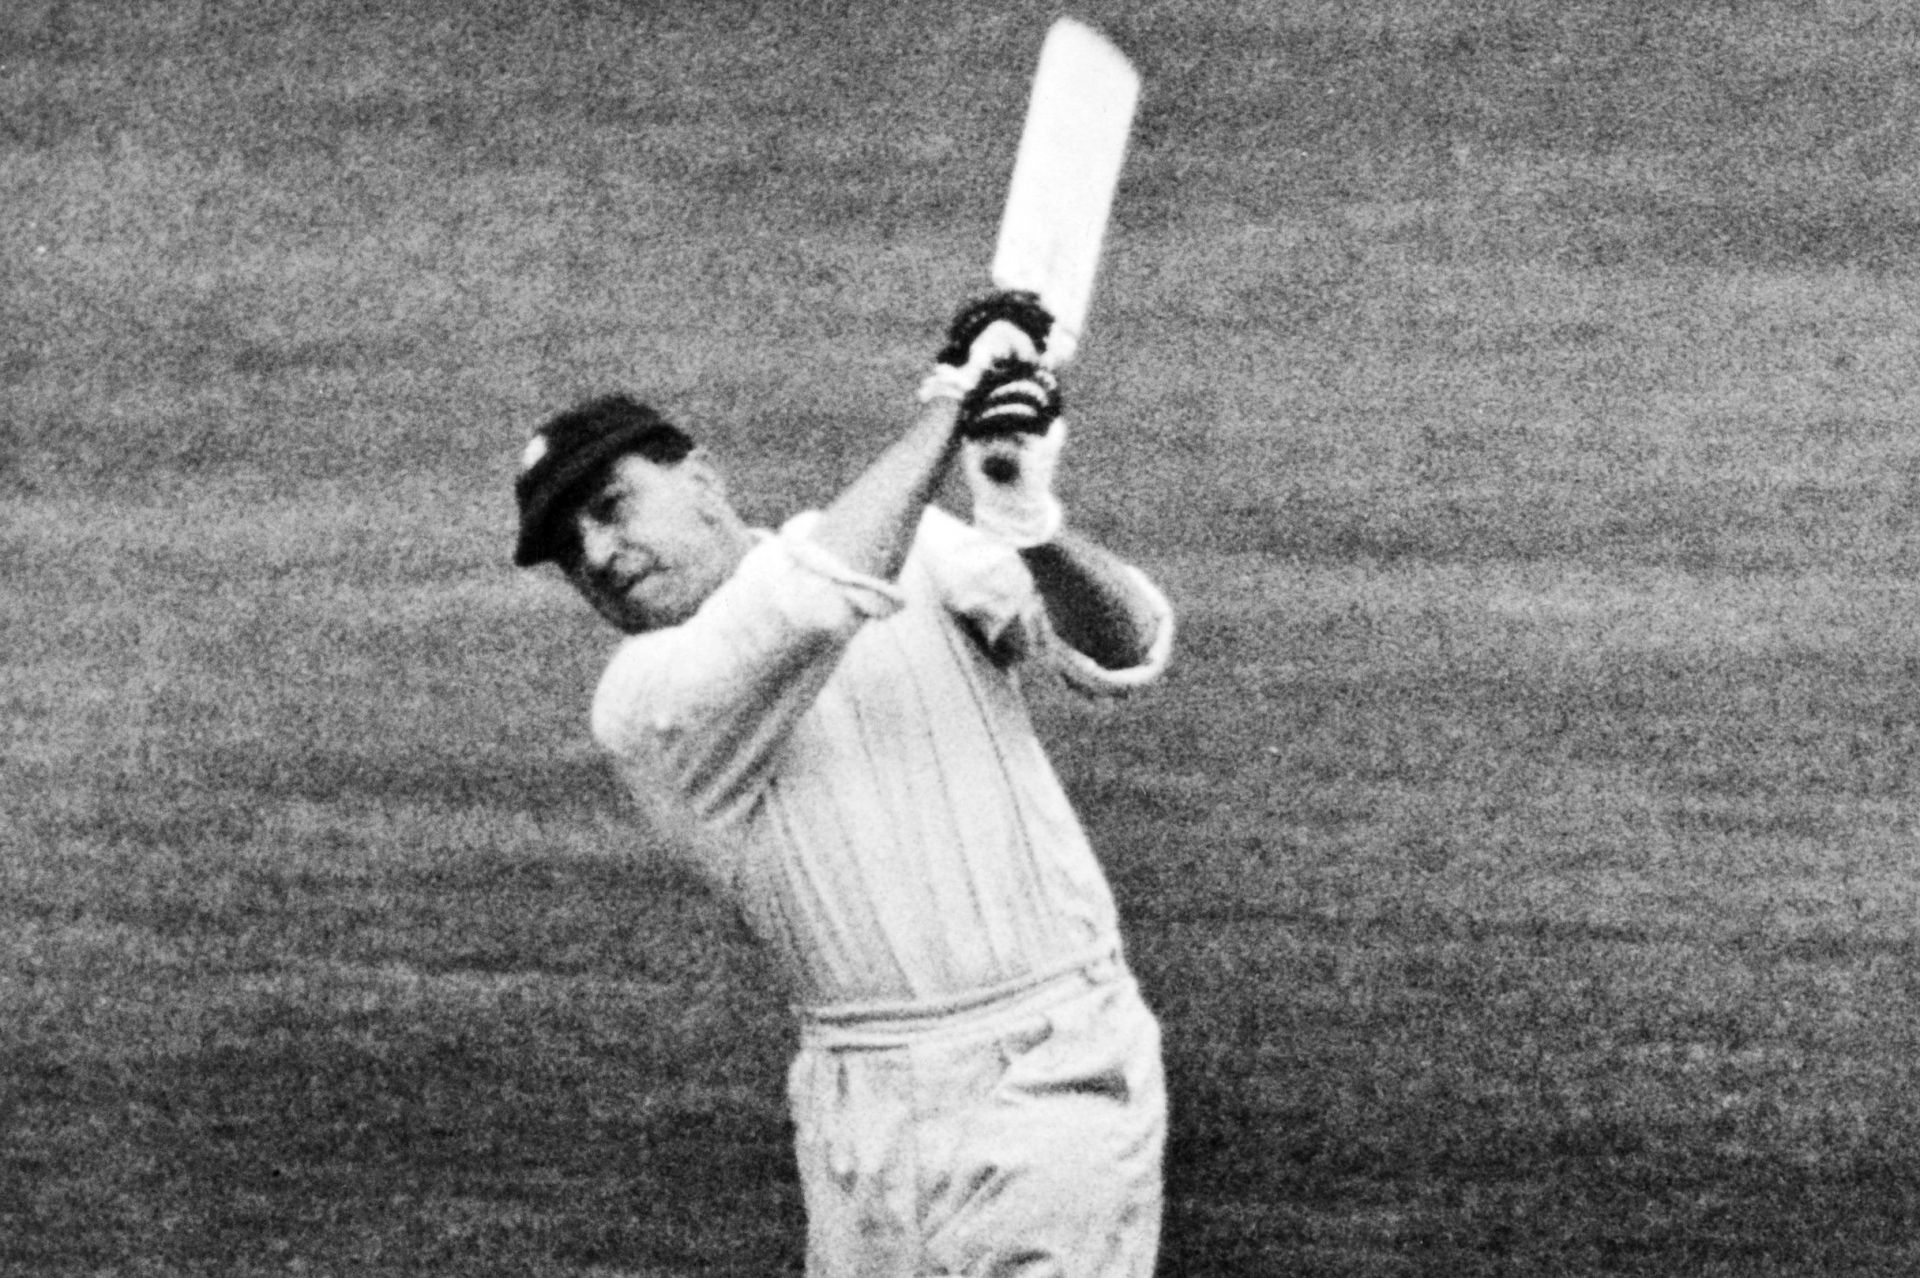 Wally Hammond is among the greatest English batsmen of all time (Image: Twitter/ICC)